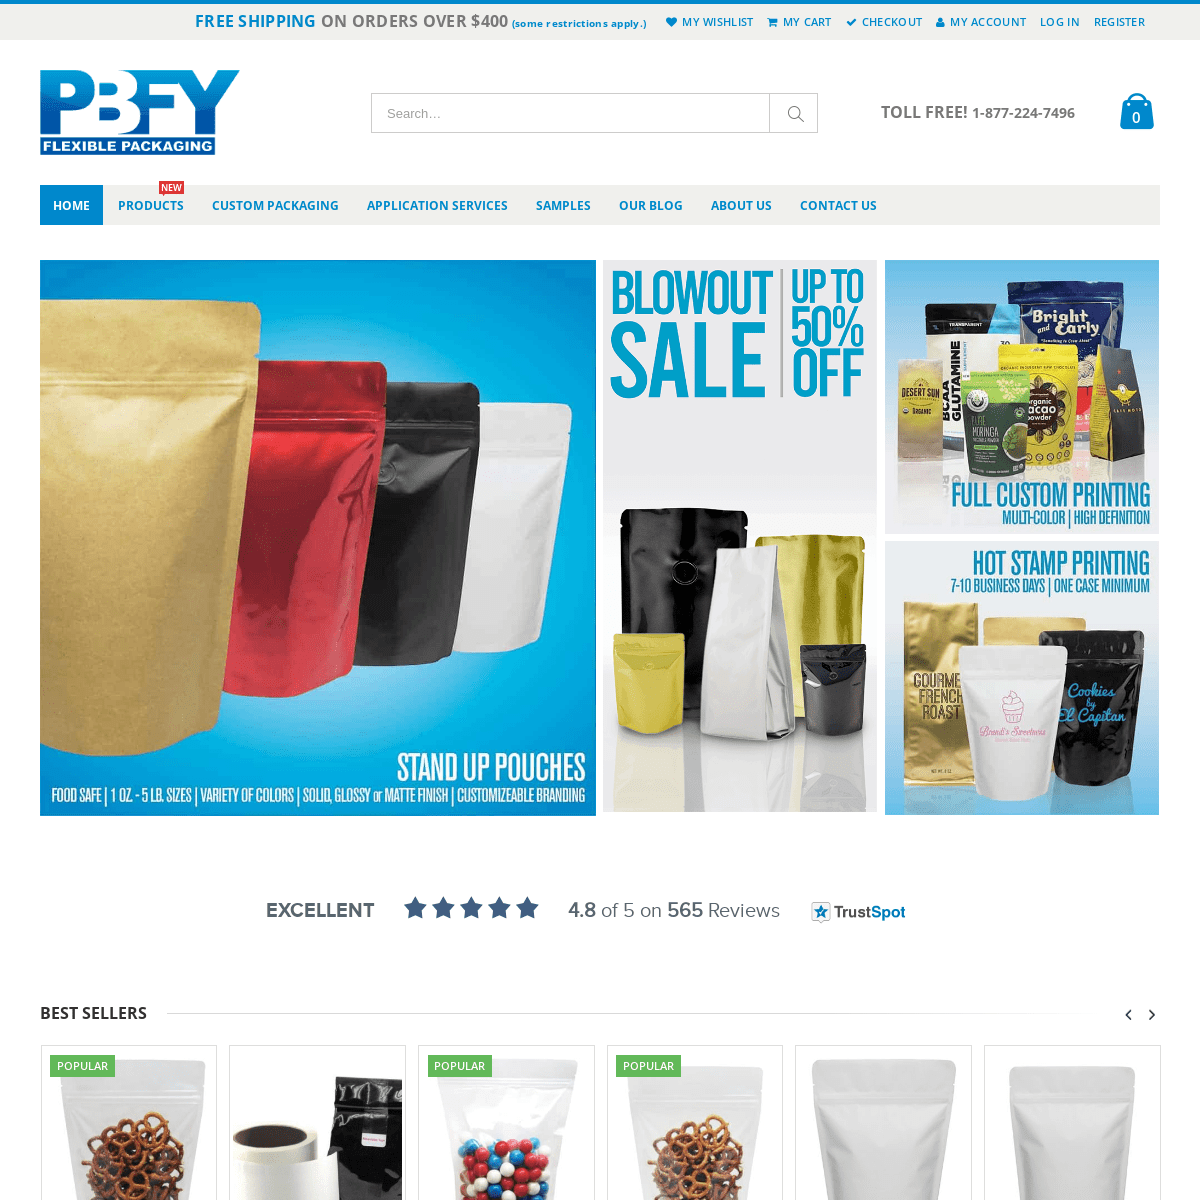 A complete backup of pbfy.com